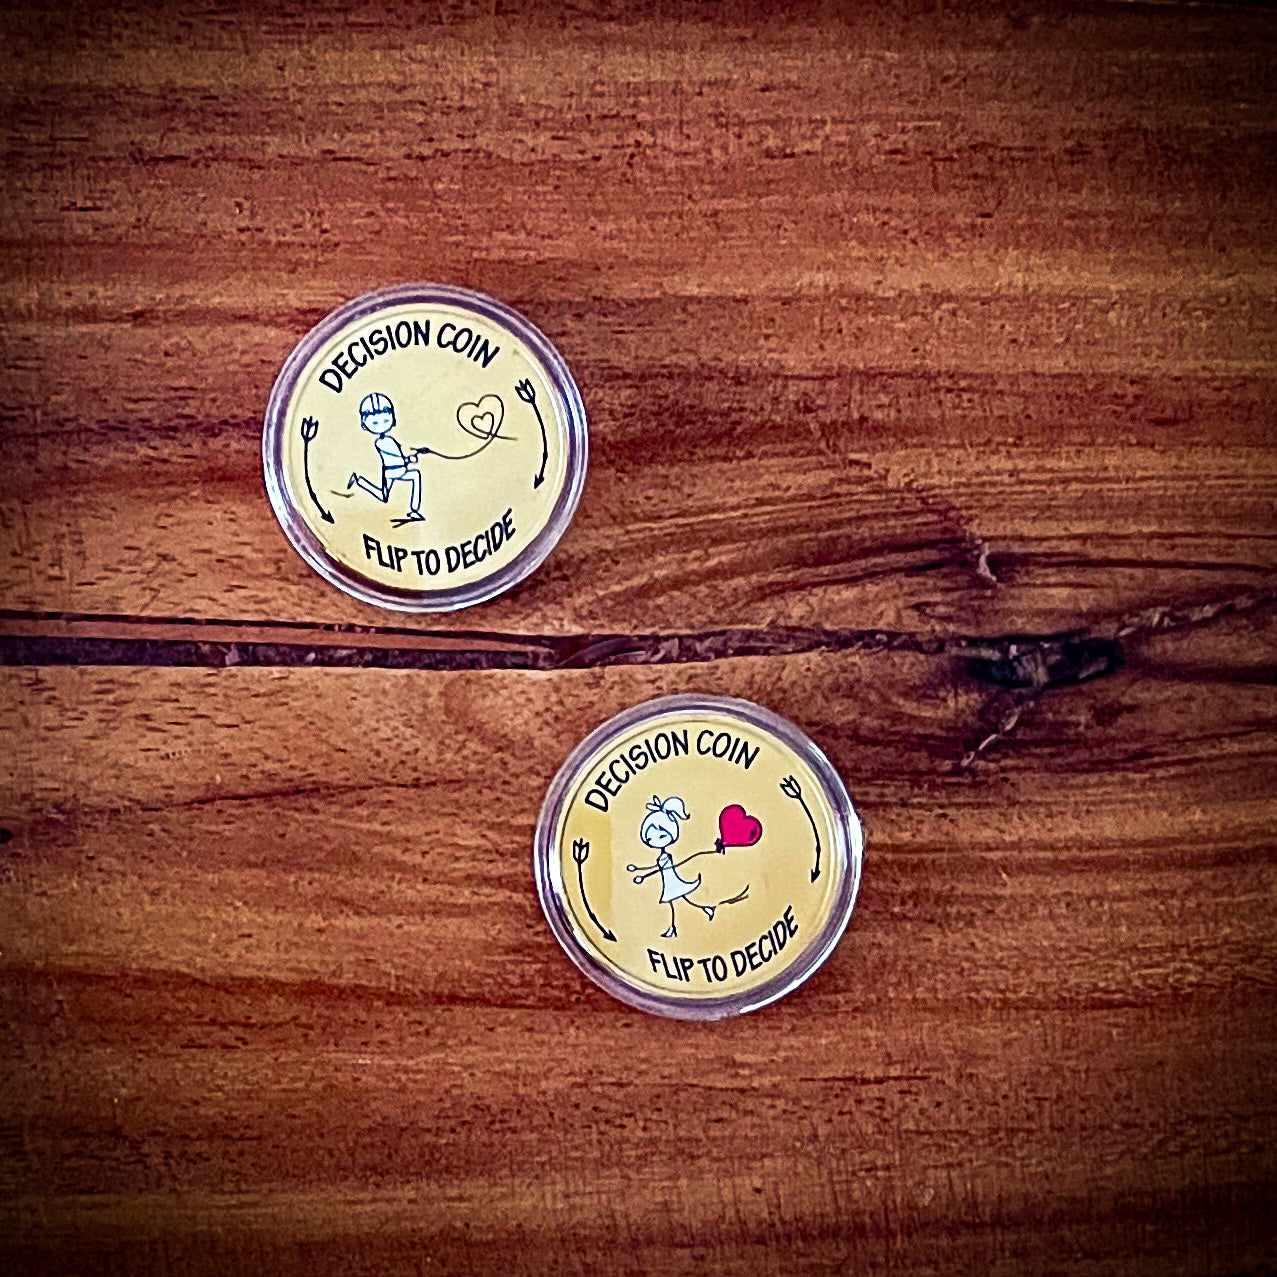 Double Sided His And Hers Decision Coin - Flip To Decide